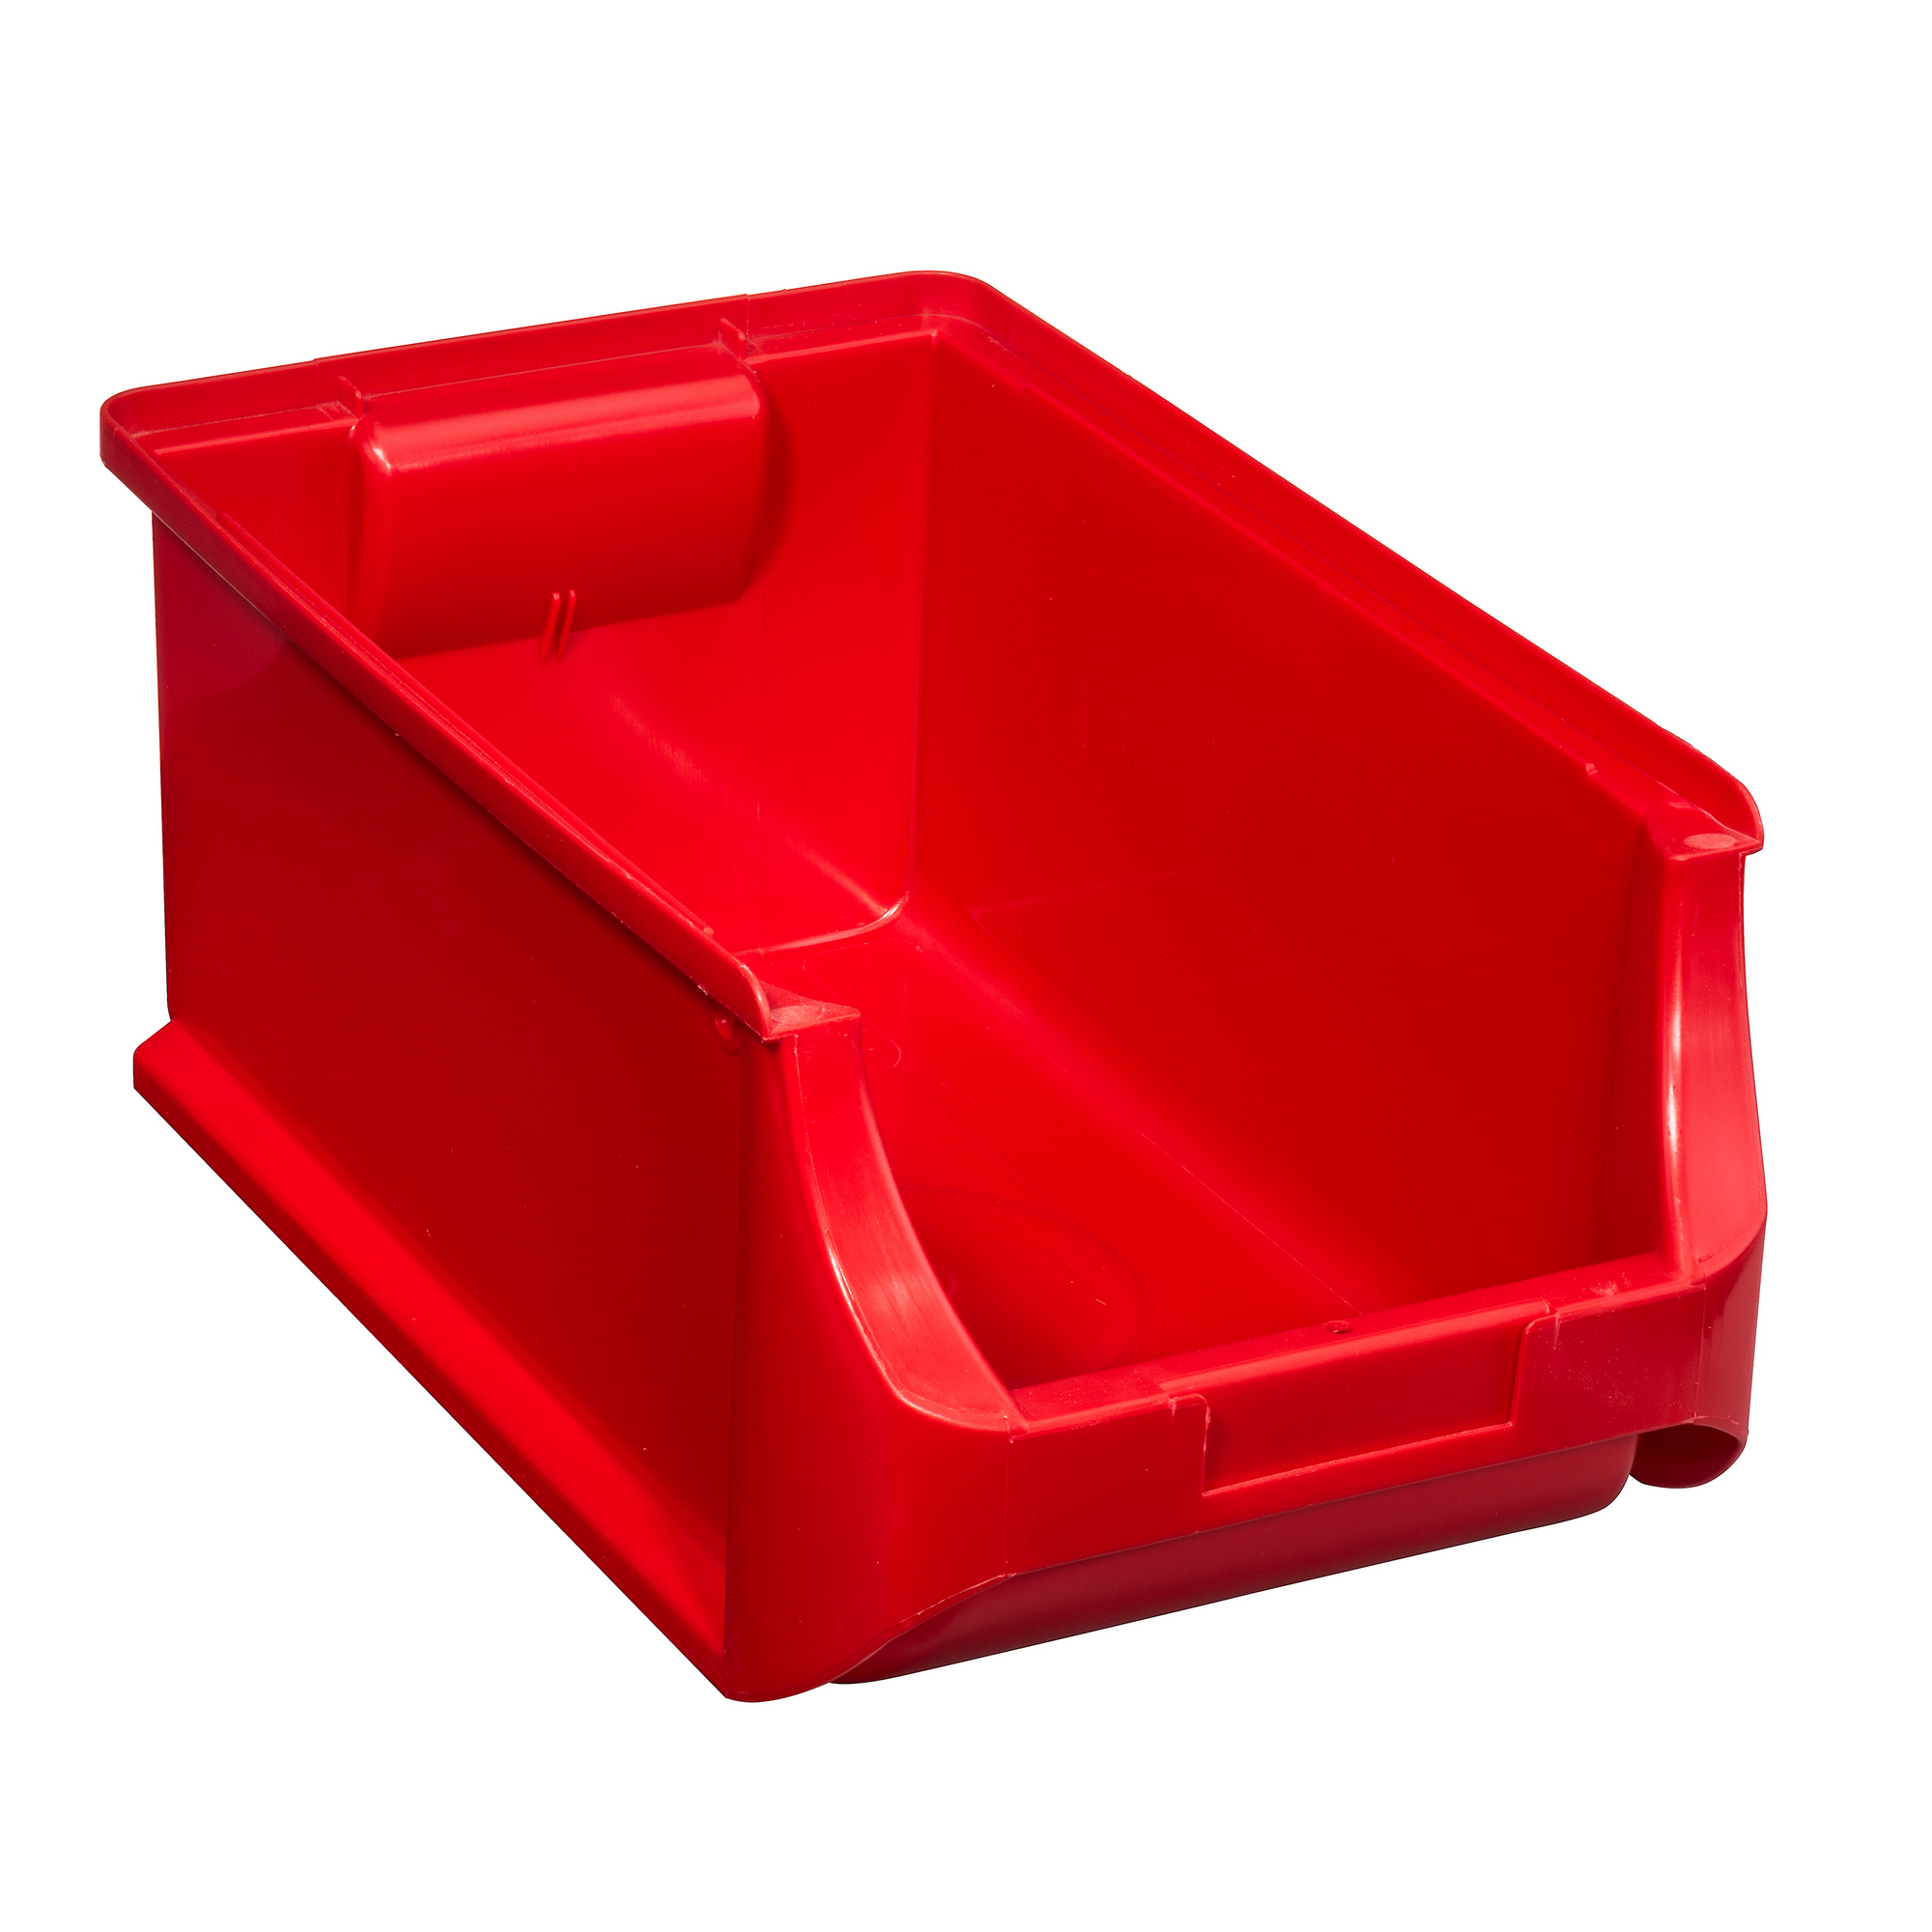 ProfiPlus Stapelsichtbox 'Box 4' rot 35,5 x 20,5 x 15 cm + product picture